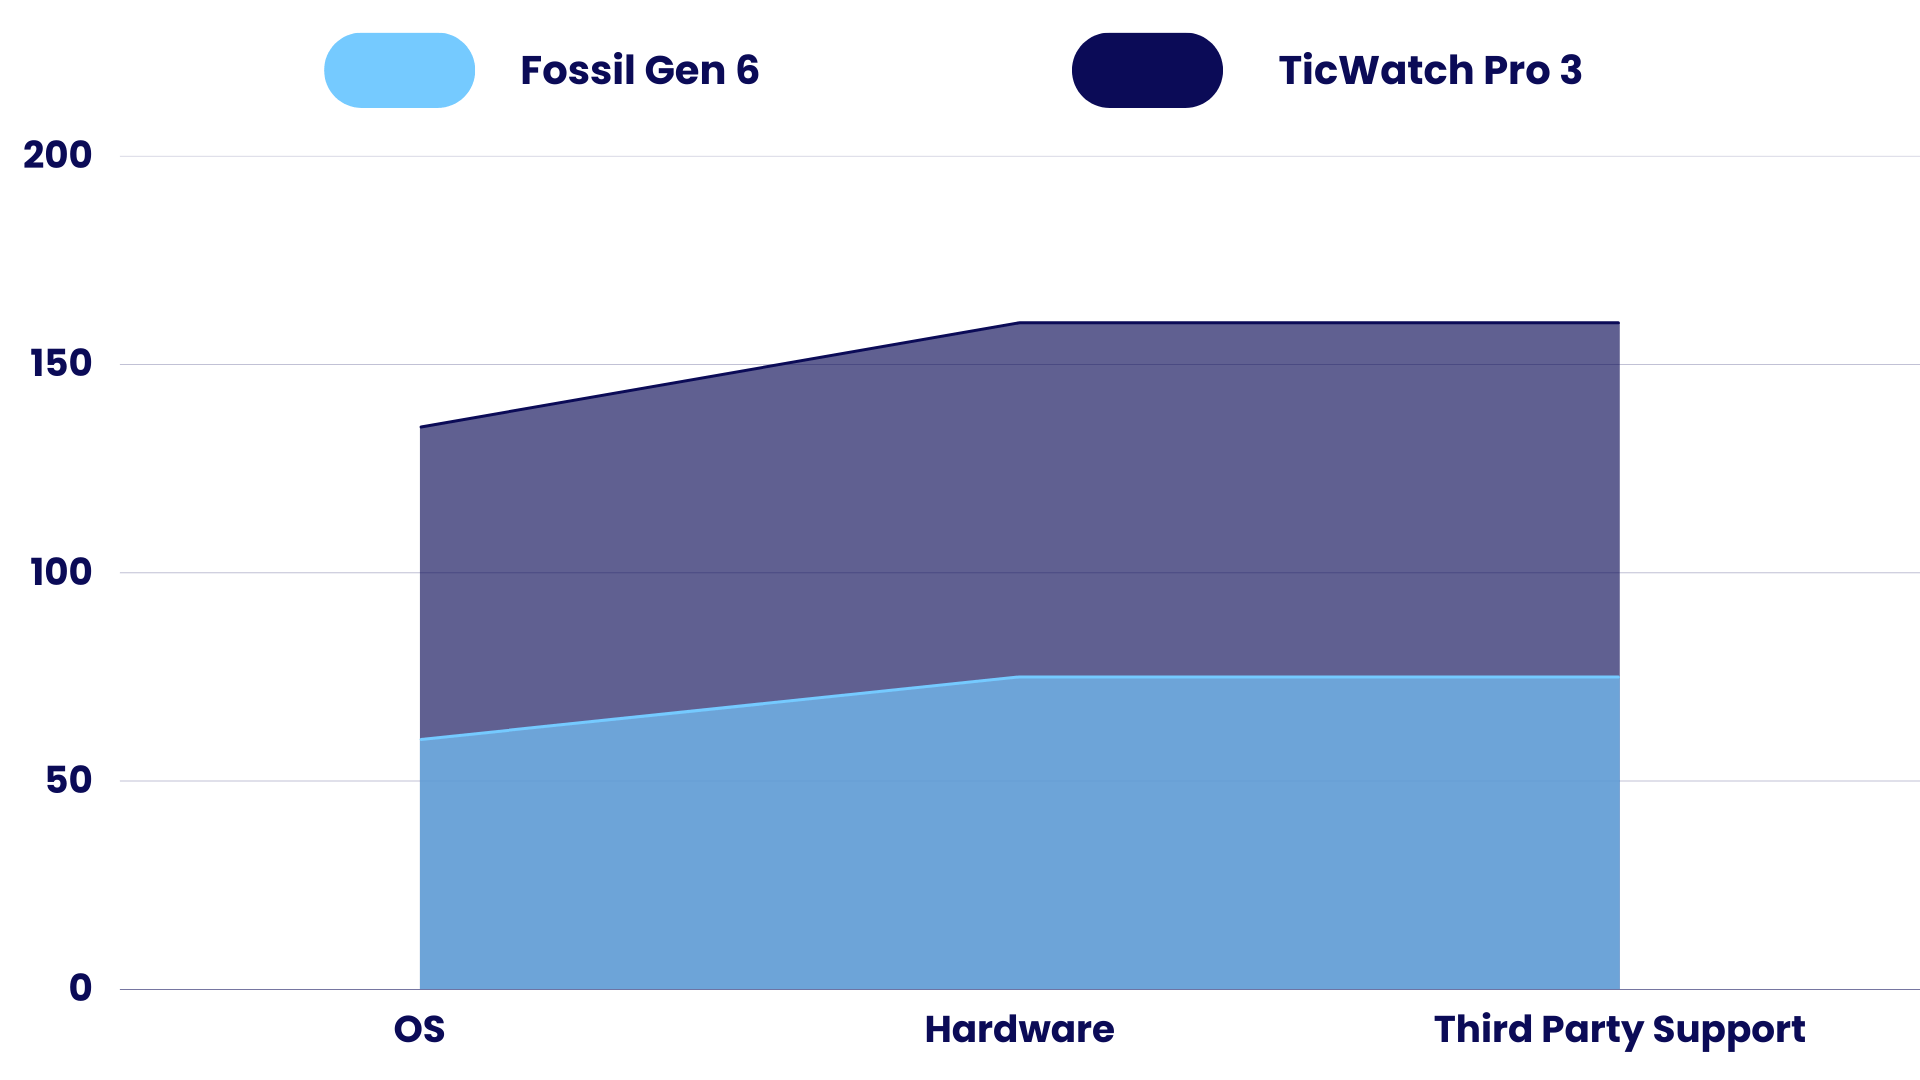 Wits Comparison of Fossil Gen 6 vs TicWatch Pro 3